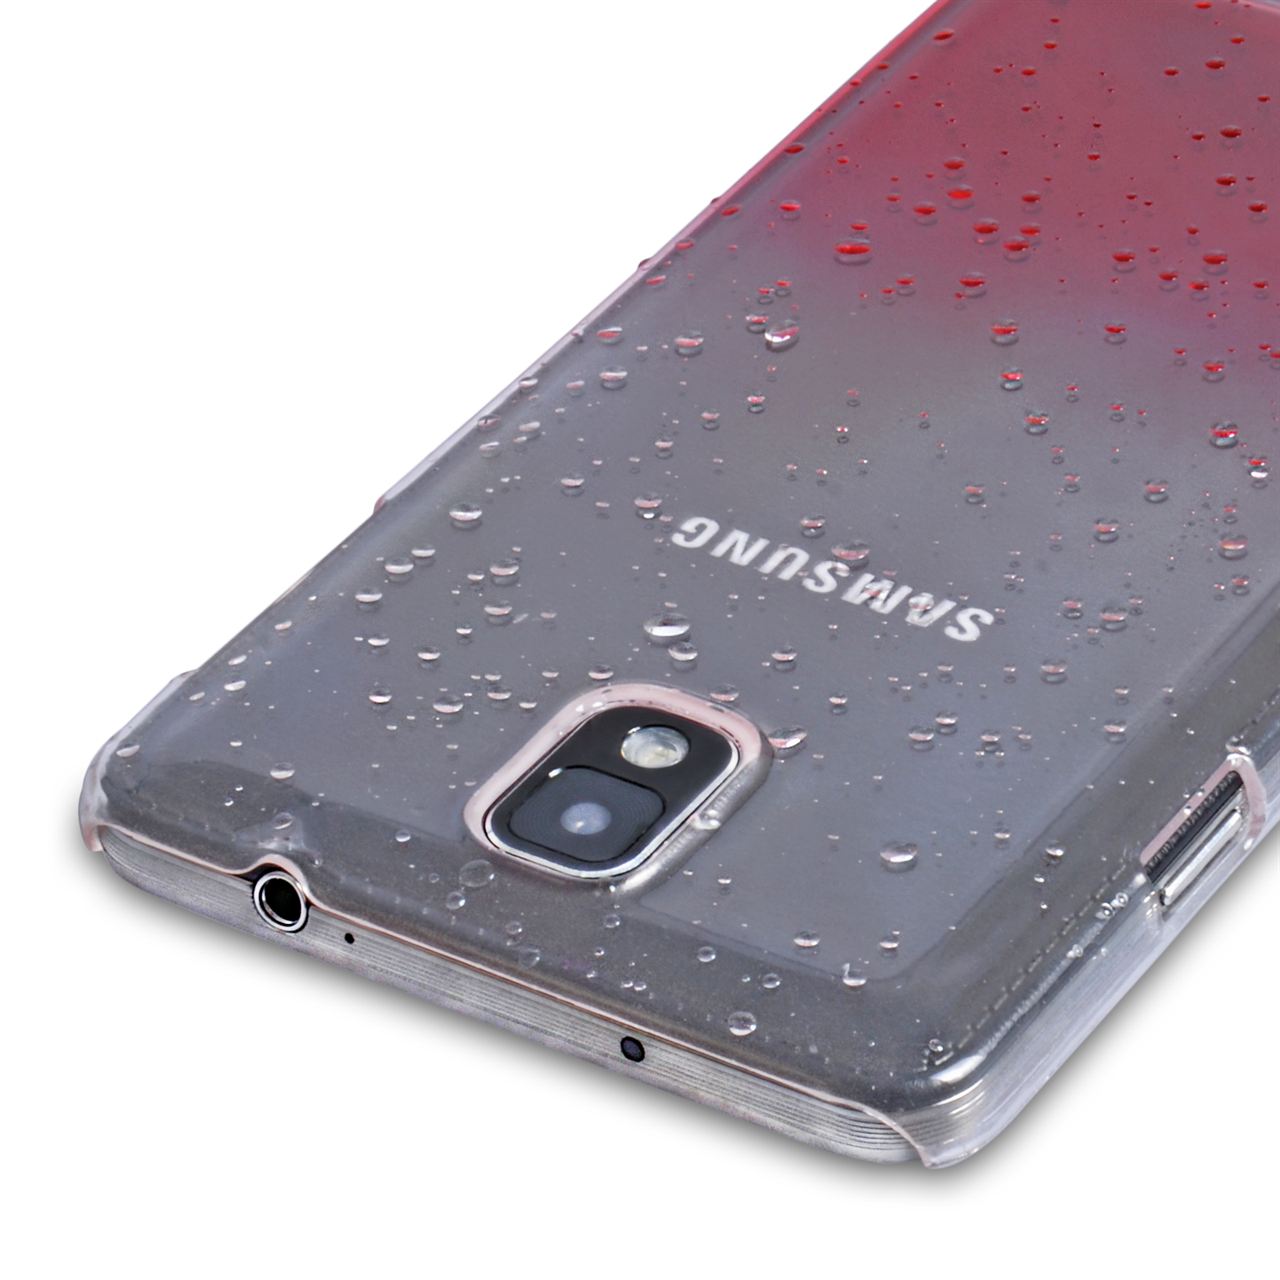 YouSave Accessories Samsung Galaxy Note 3 Waterdrop Hard Case - Red